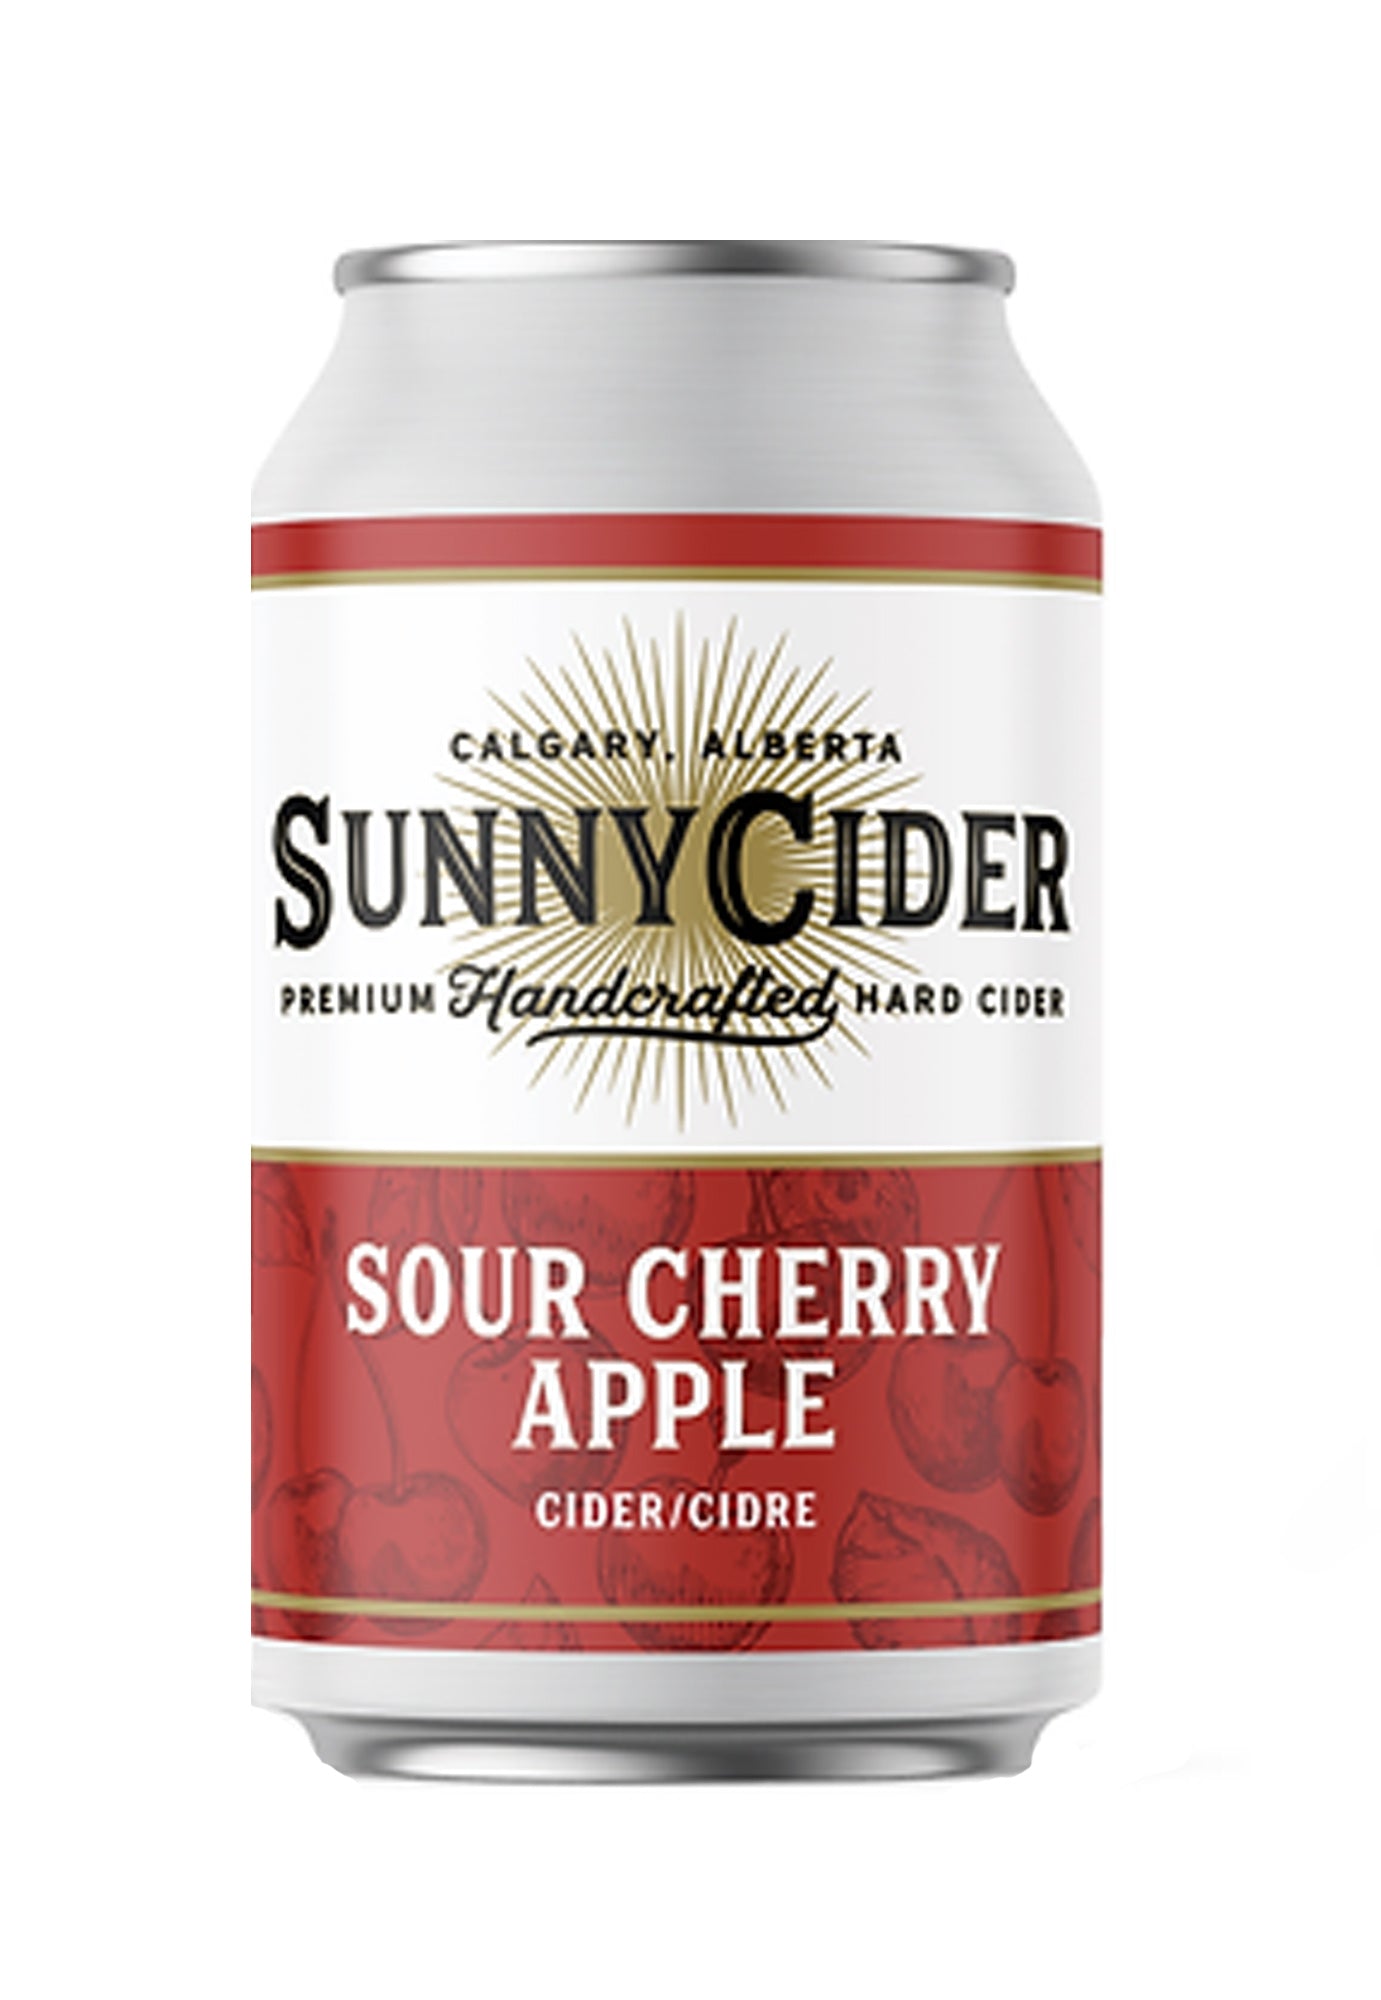 SunnyCider Sour Cherry Apple Cider 355 ml - 4 Cans